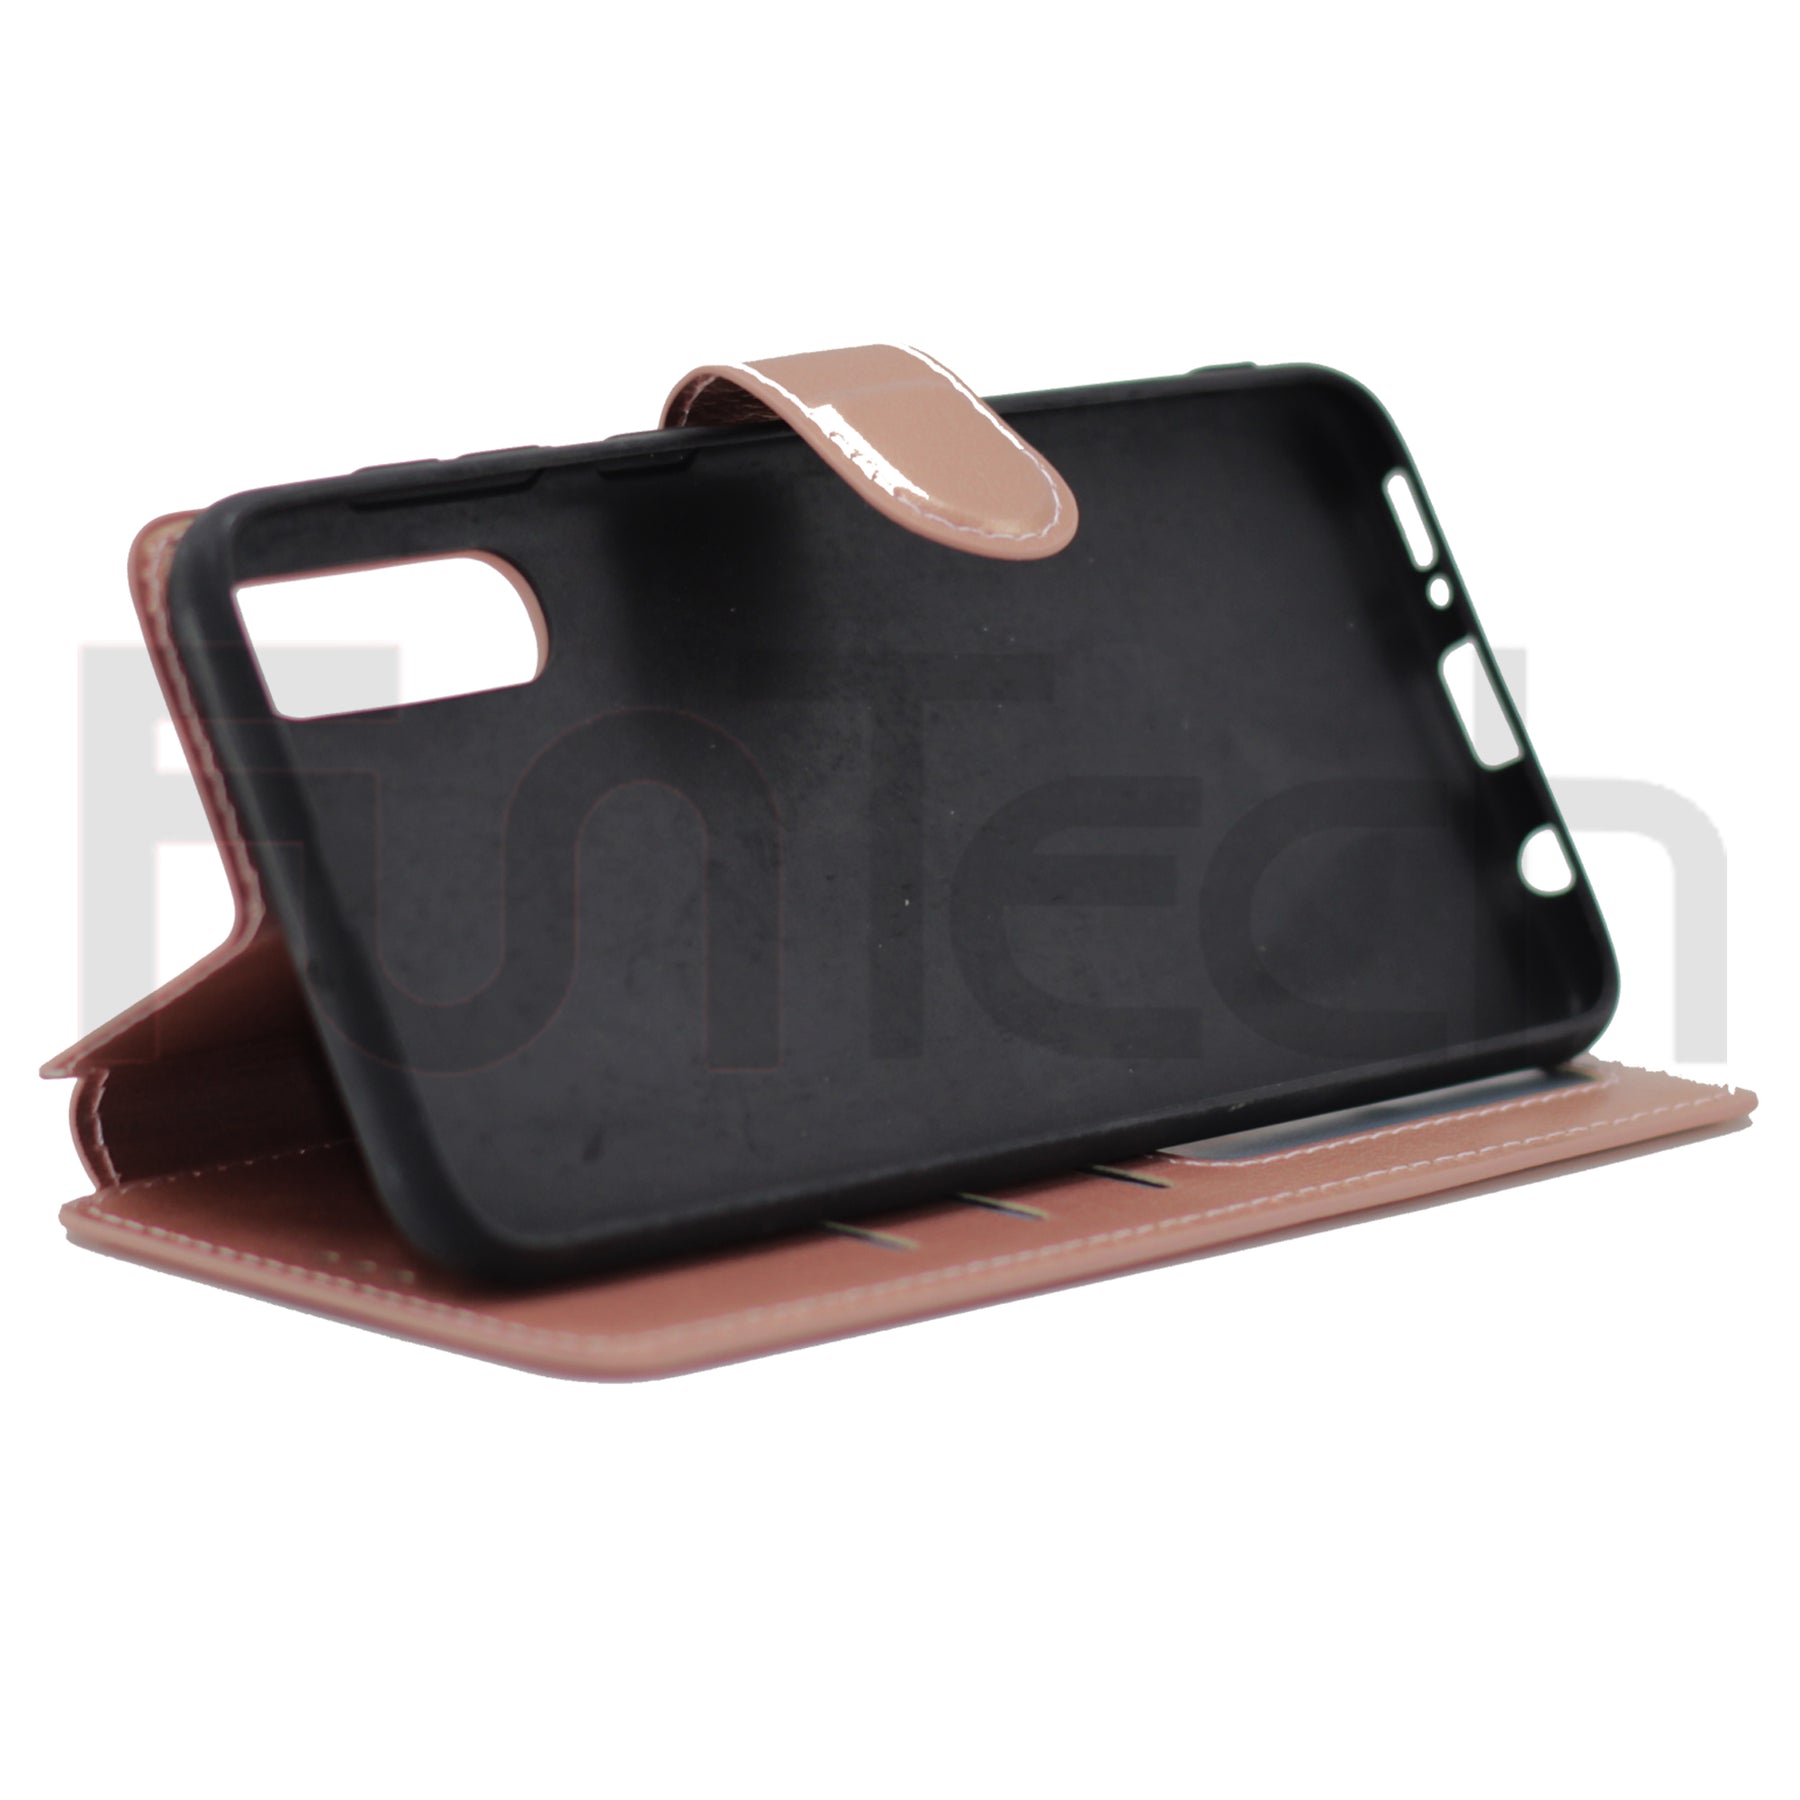 Samsung A50 / A30, Leather Wallet Case, 